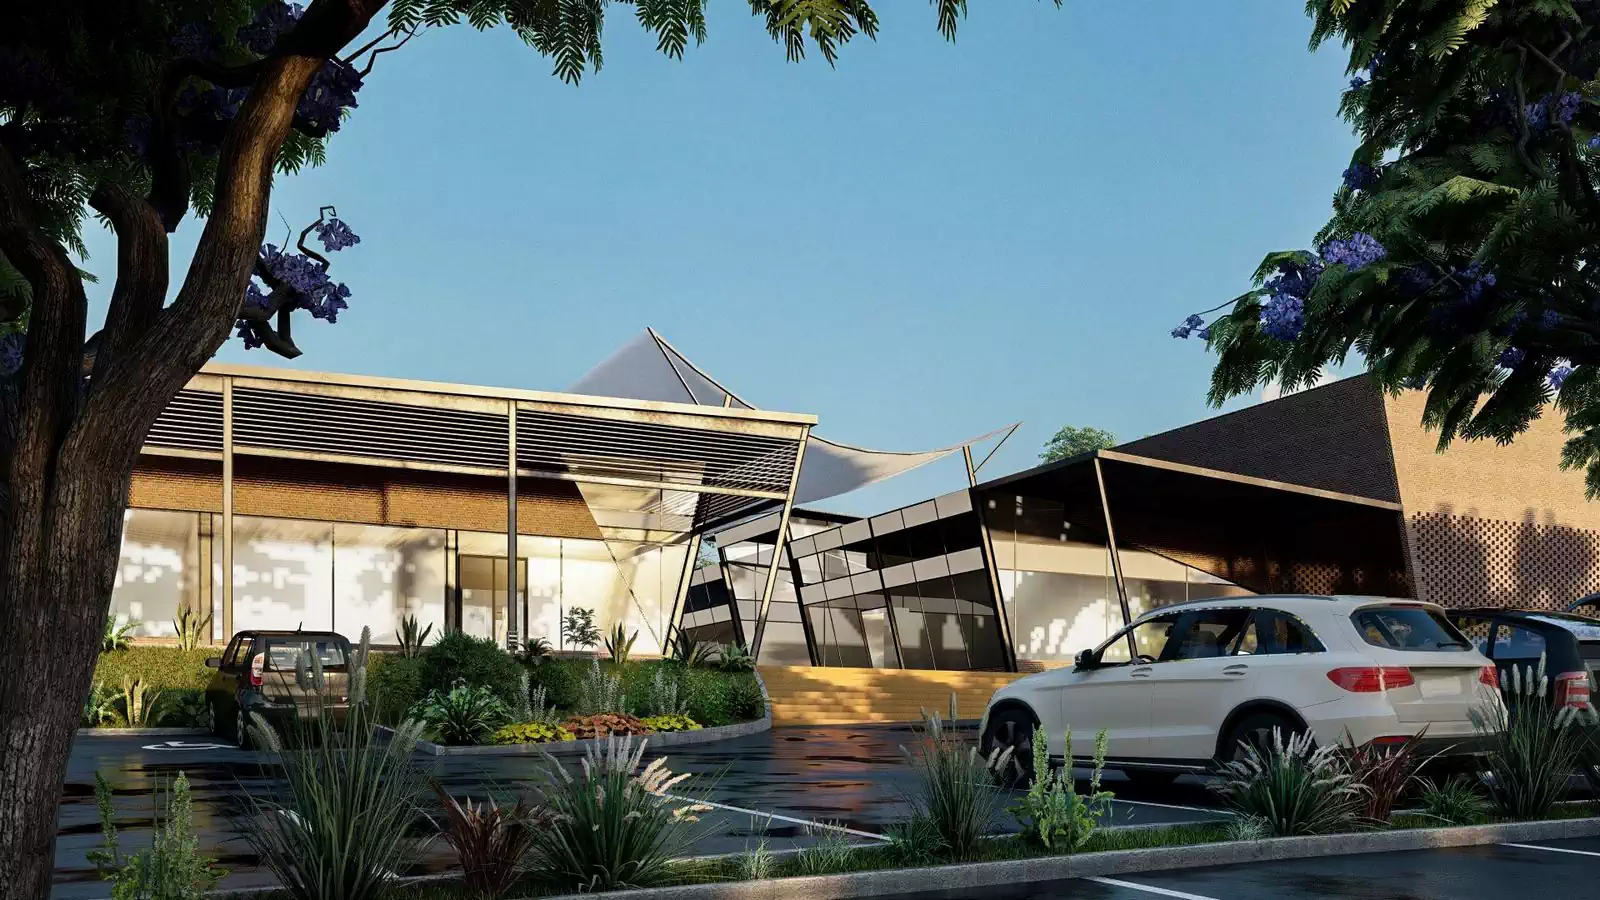 Entrance to modern shopping centre design in Lusaka Zambia by architectural designers Pantic Architects